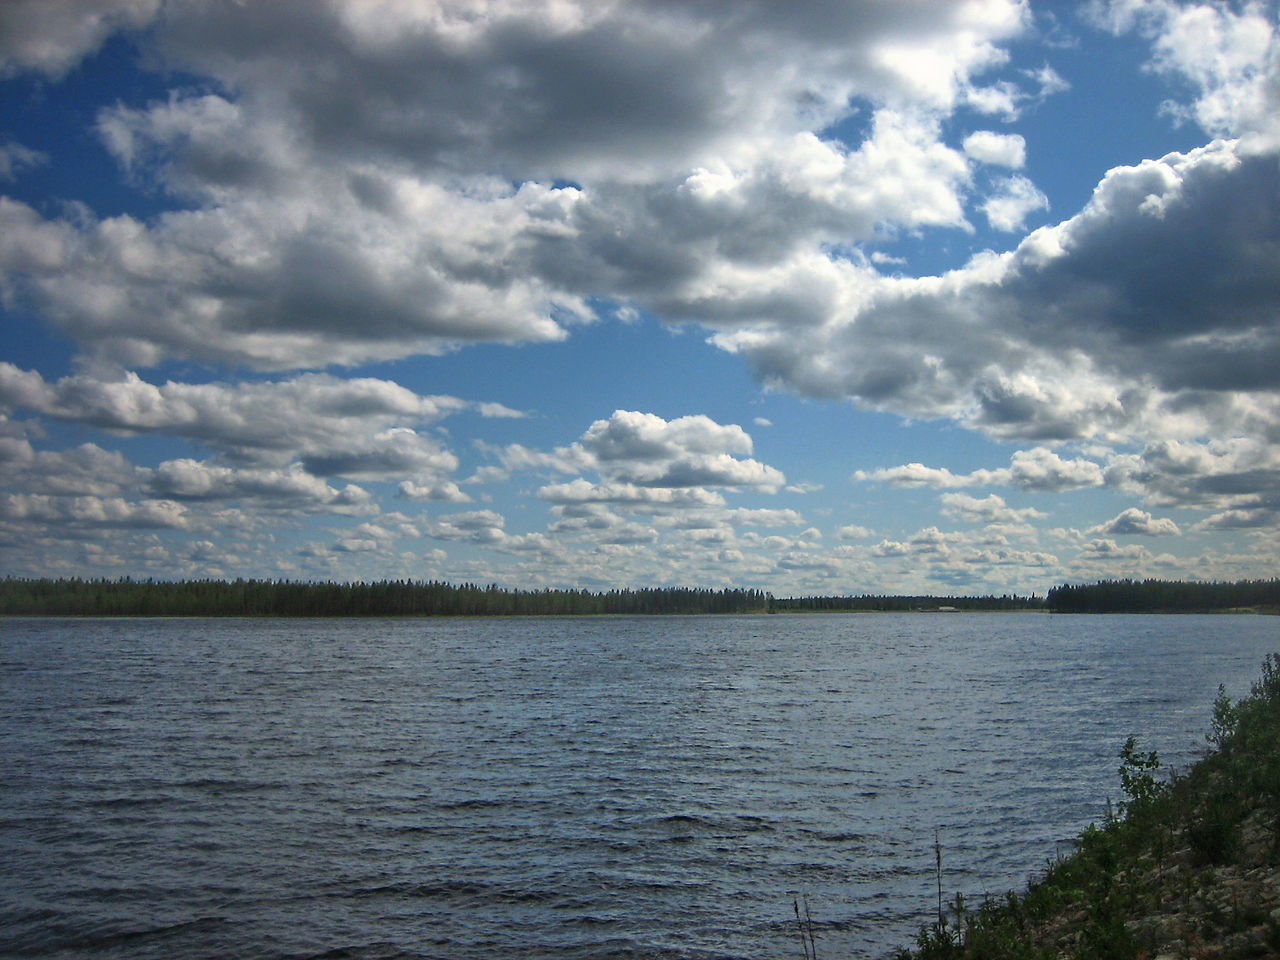 VIEW OF LAKE AGAINST CLOUDY SKY